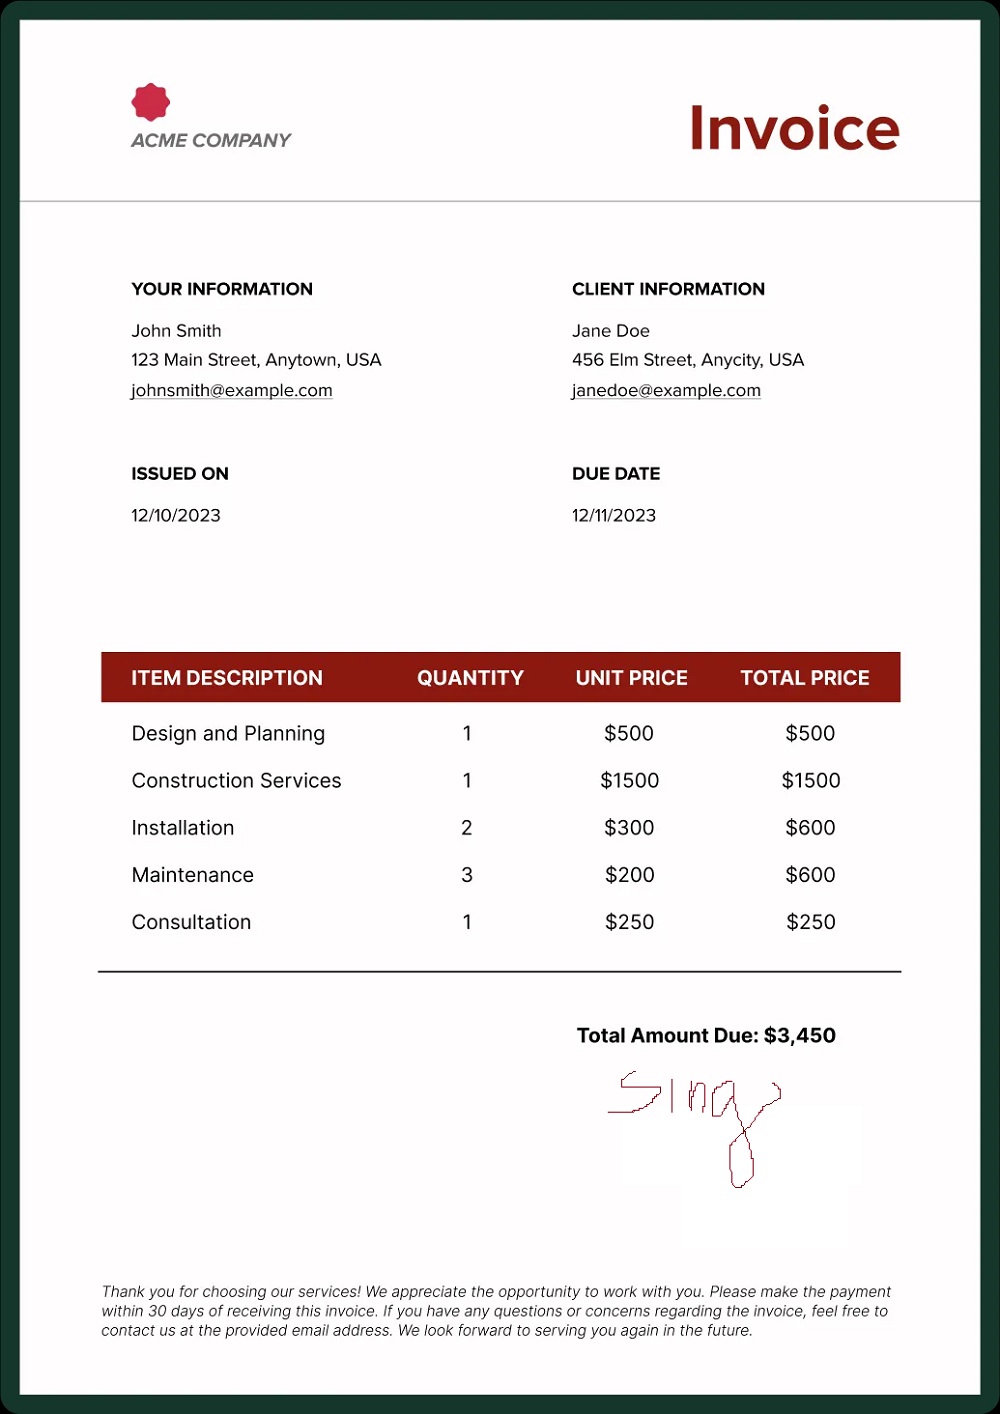 Printable Pictures of Invoice Template